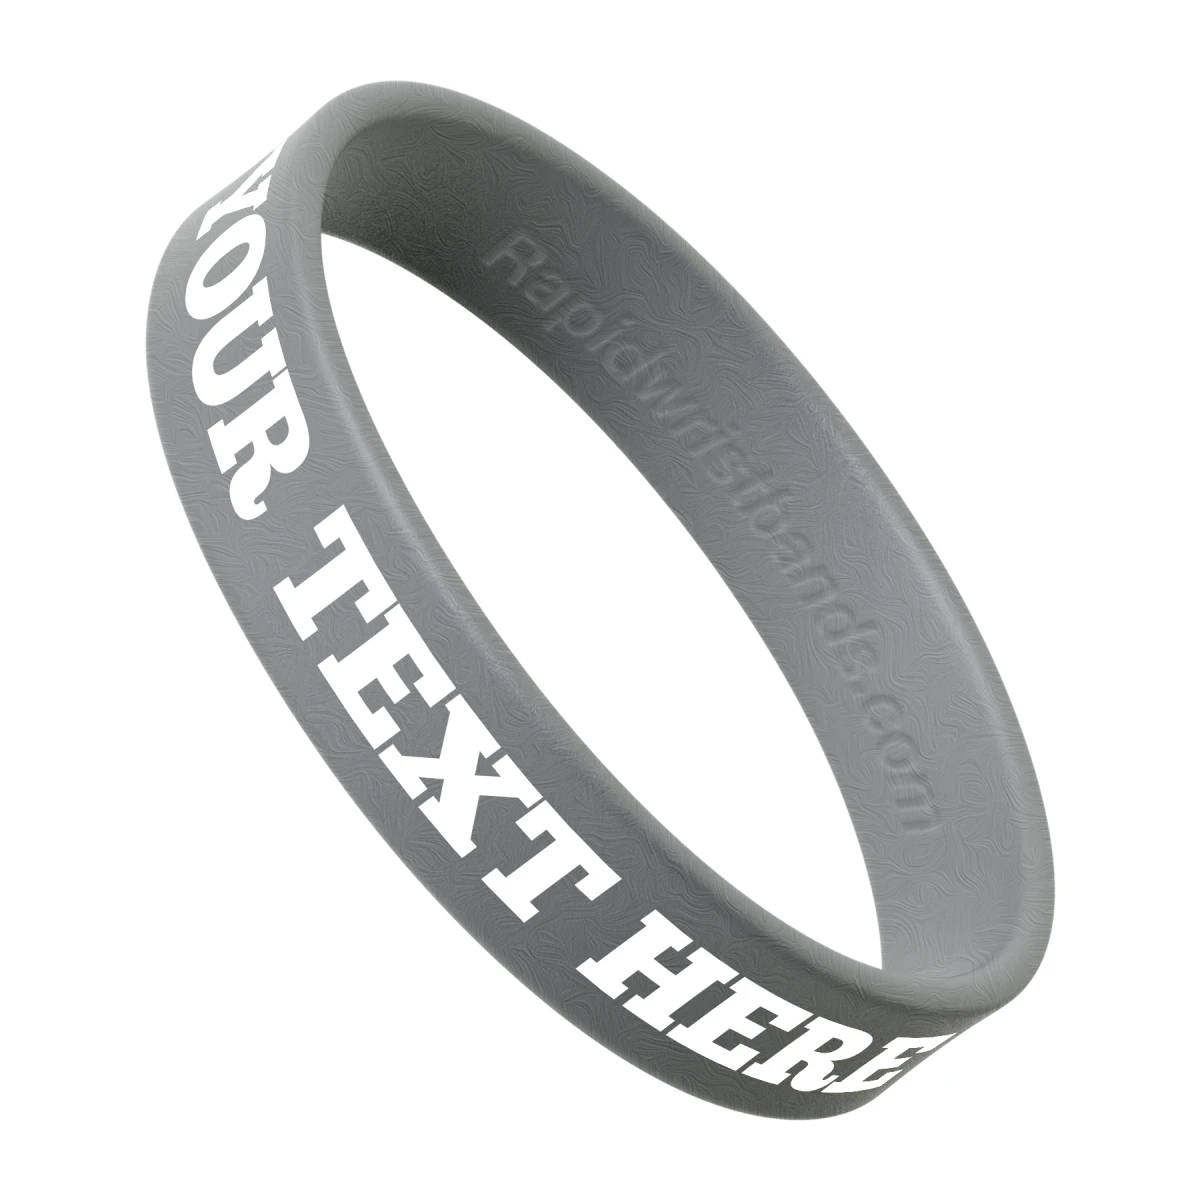 Metallic Silver Wristband With Your Text Here Printed In White